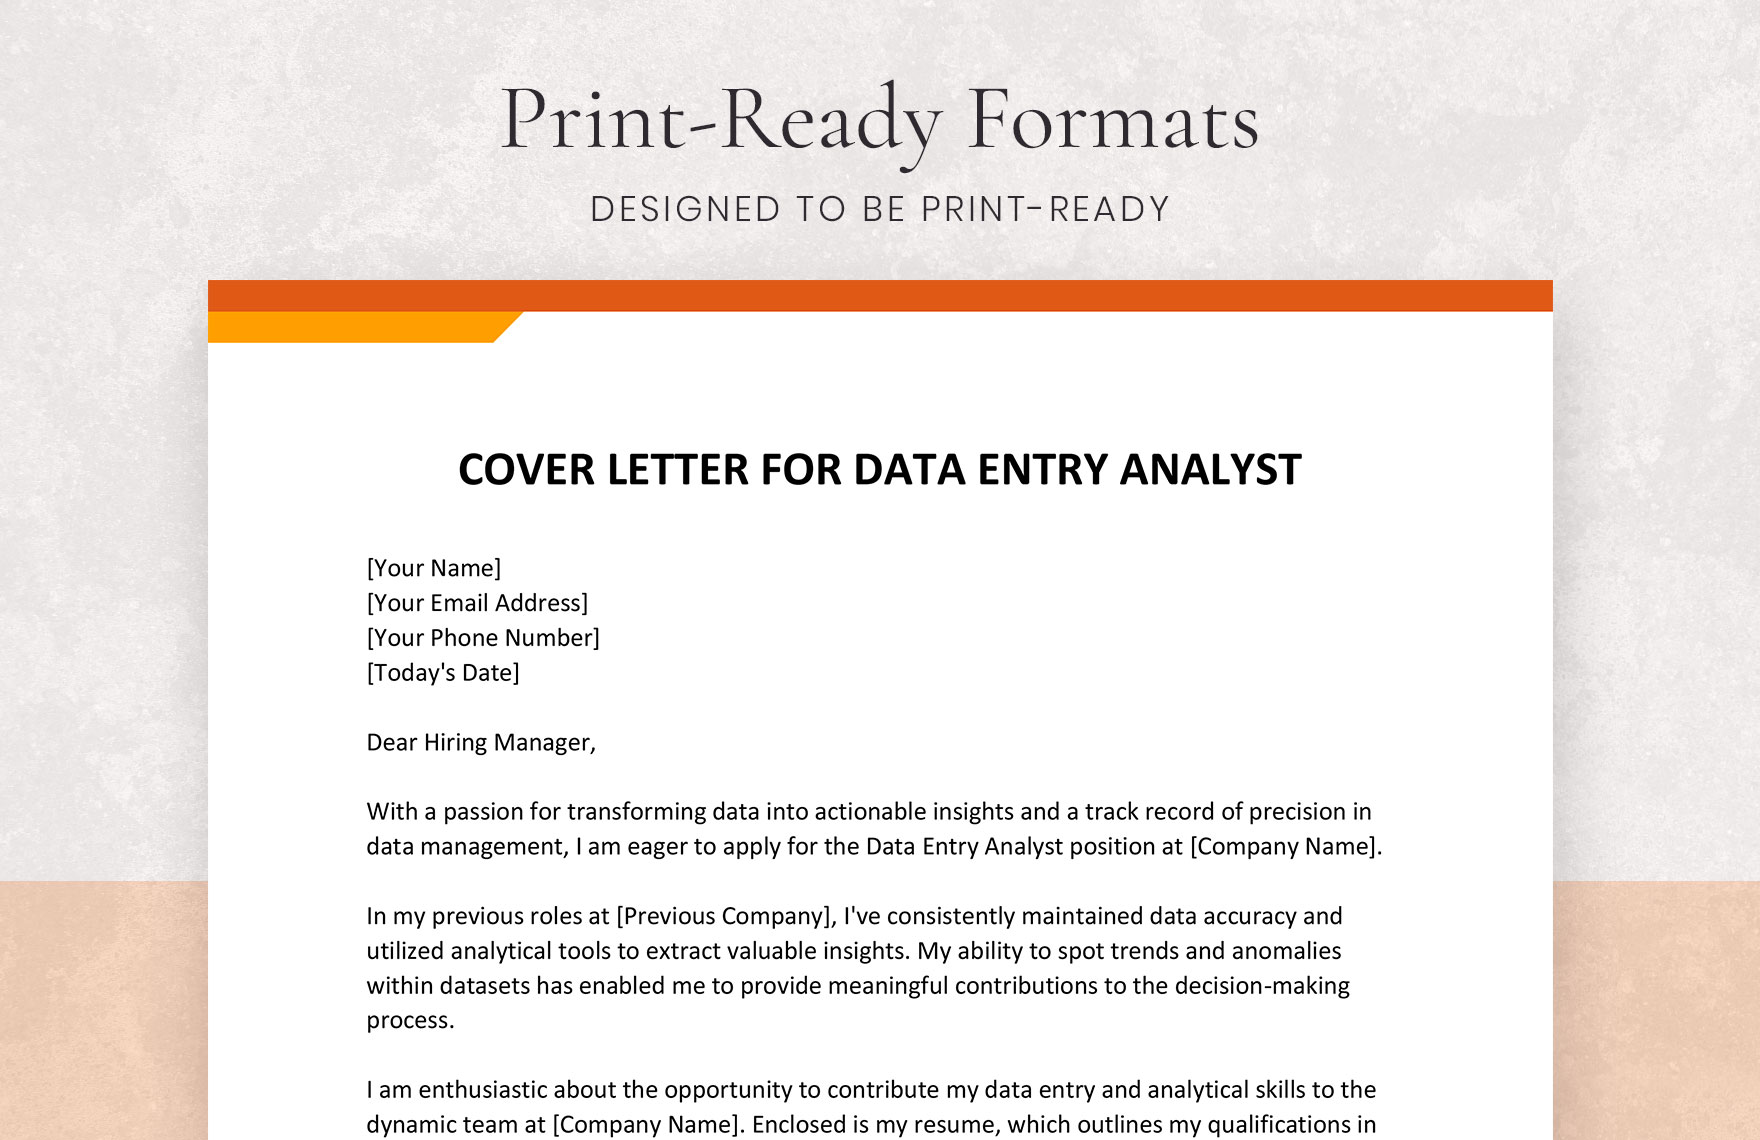 Cover Letter for Data Entry Analyst